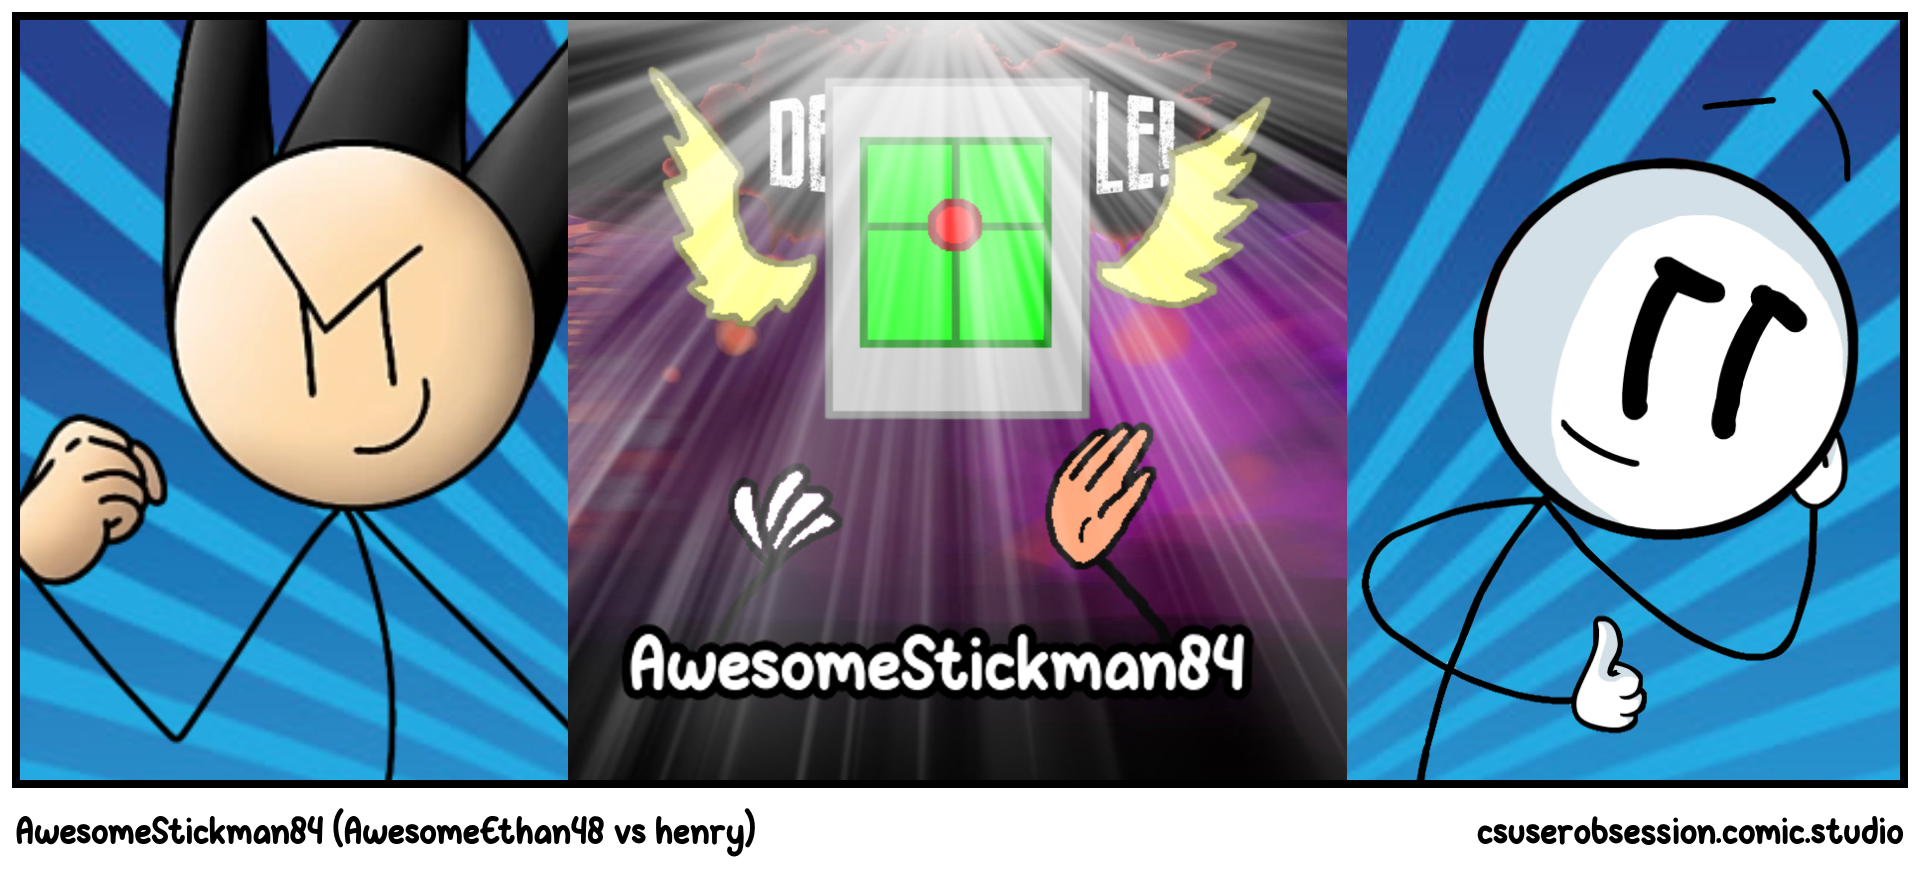 AwesomeStickman84 (AwesomeEthan48 vs henry)